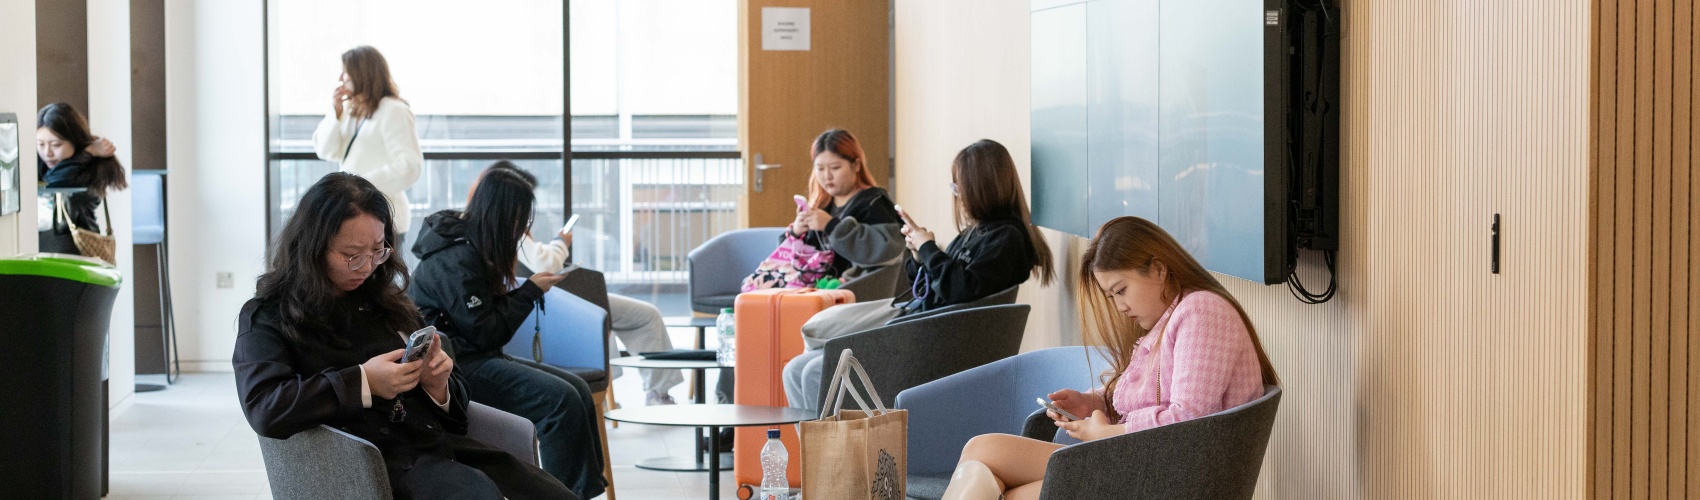 International students relax in the lobby of a university building